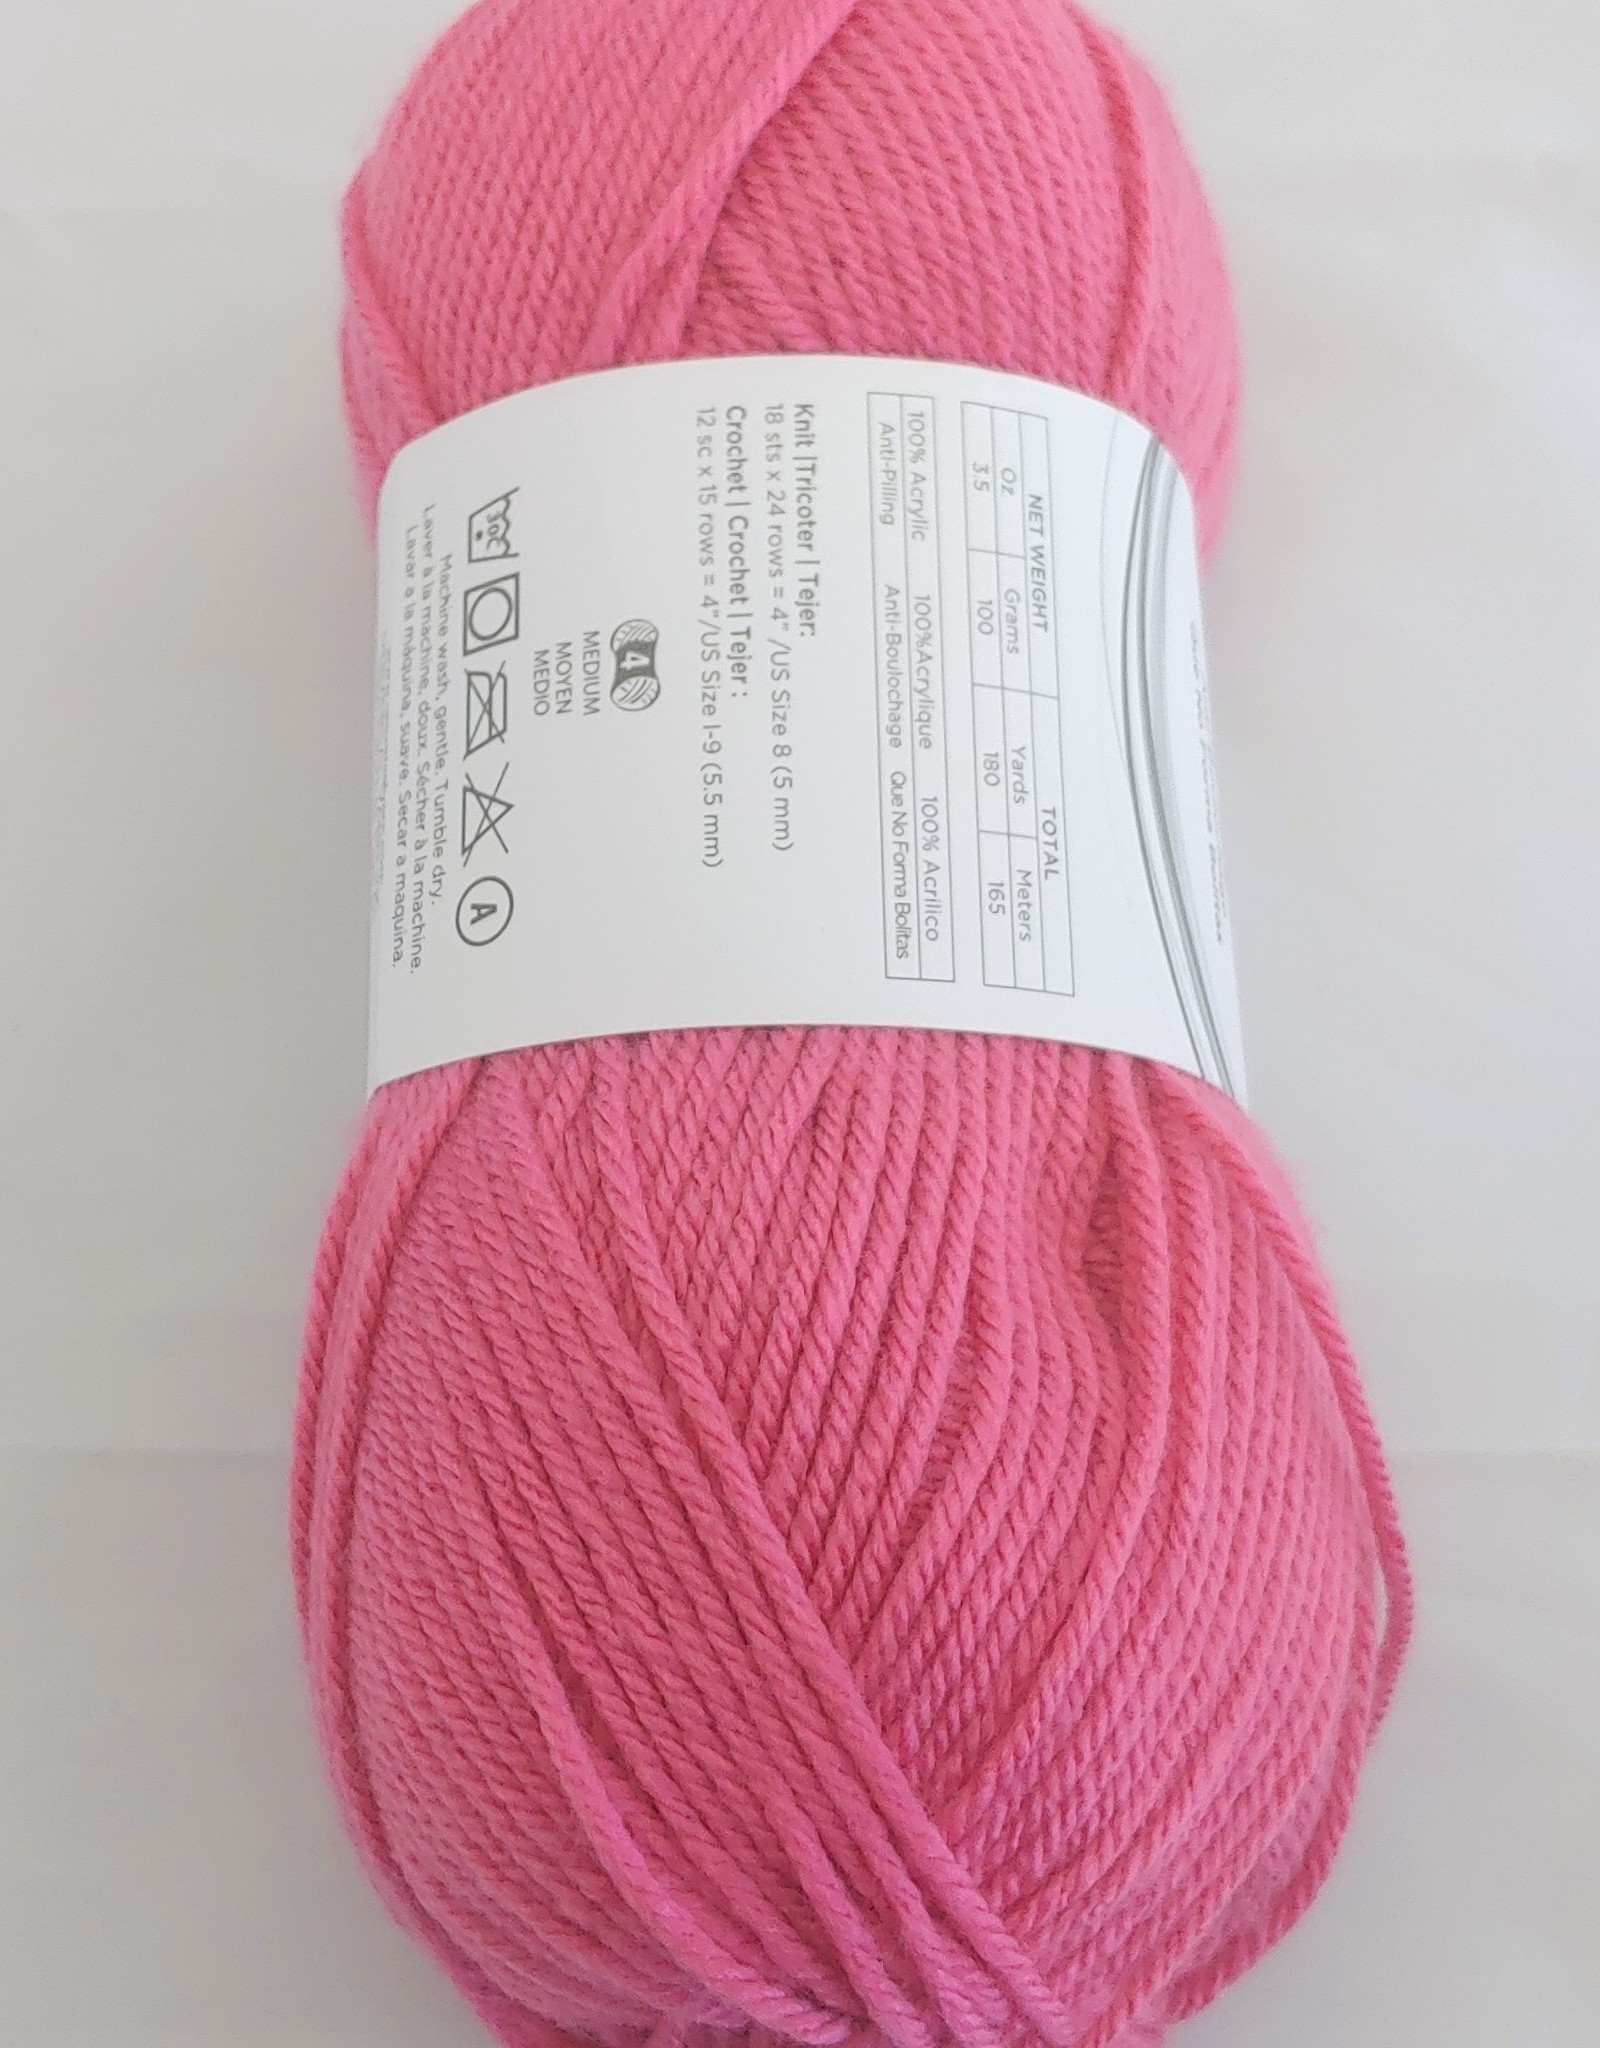 Uptown Worsted - Close-Knit Yarn Cooperative